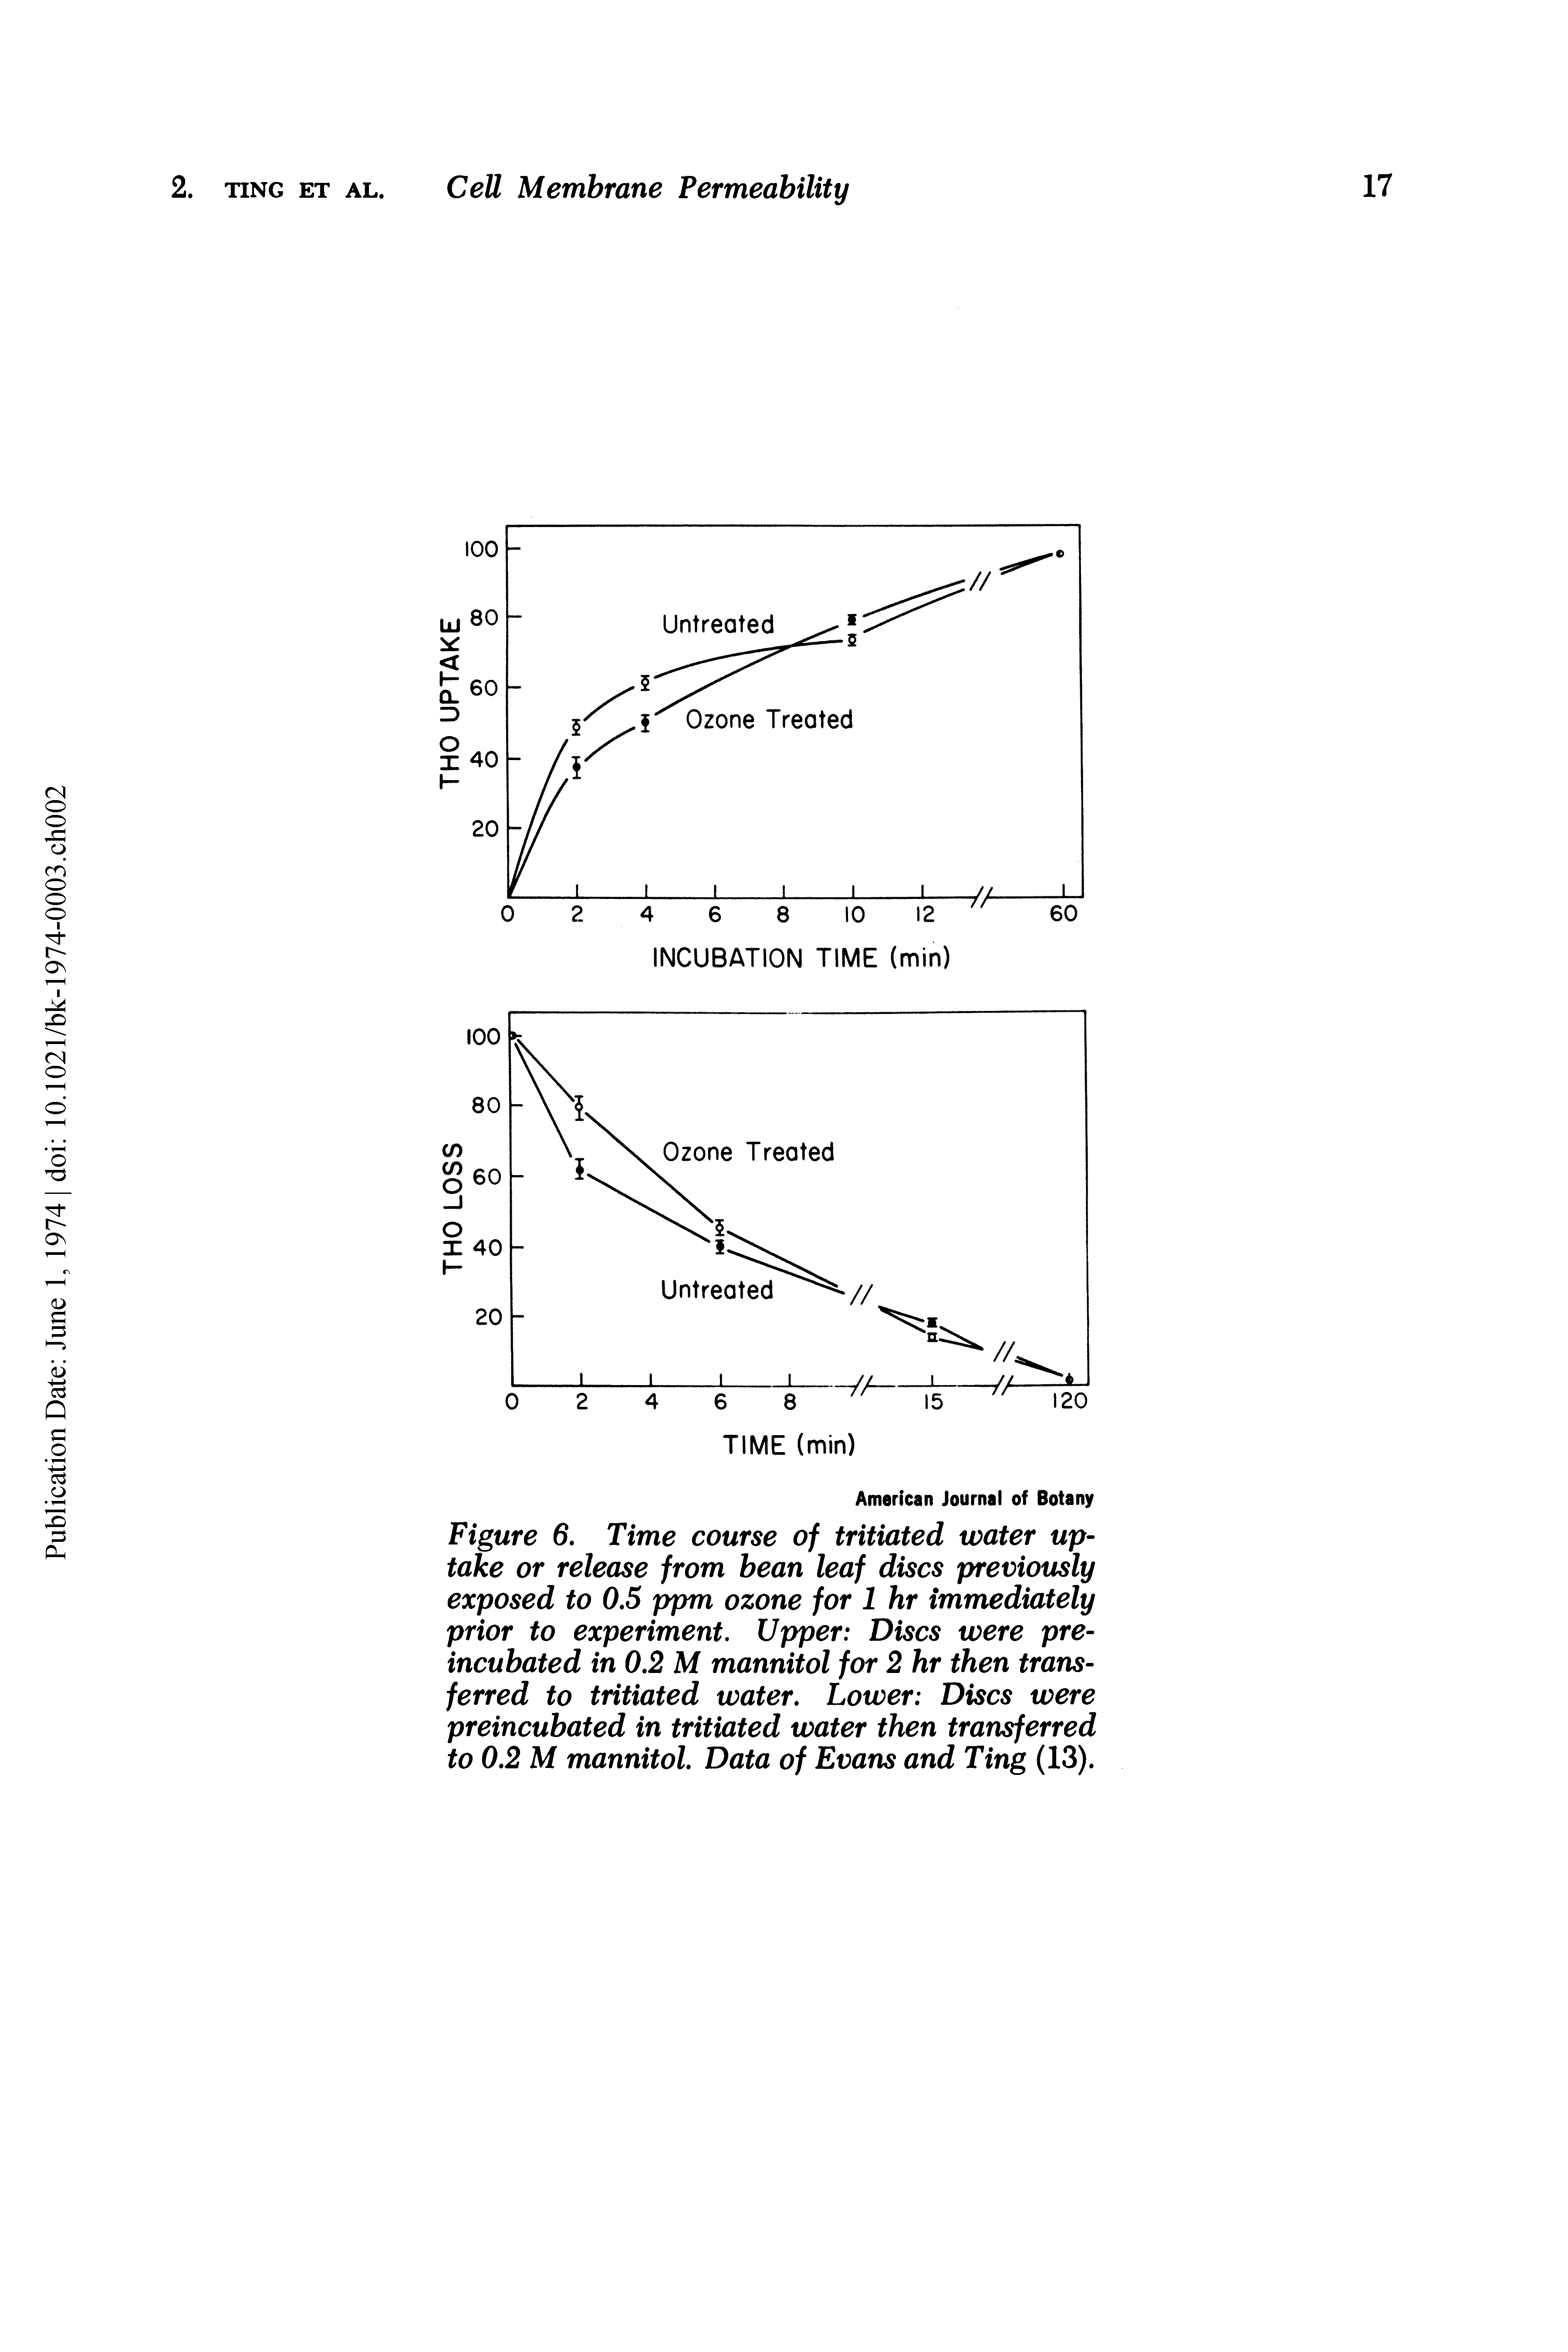 Figure 6. Time course of tritiated water uptake or release from bean leaf discs previously exposed to 0.5 ppm ozone for 1 hr immediately prior to experiment. Upper Discs were preincubated in 0.2 M mannitol for 2 hr then transferred to tritiated water. Lower Discs were preincubated in tritiated water then transferred to 0.2 M mannitol. Data of Evans and Ting (13).